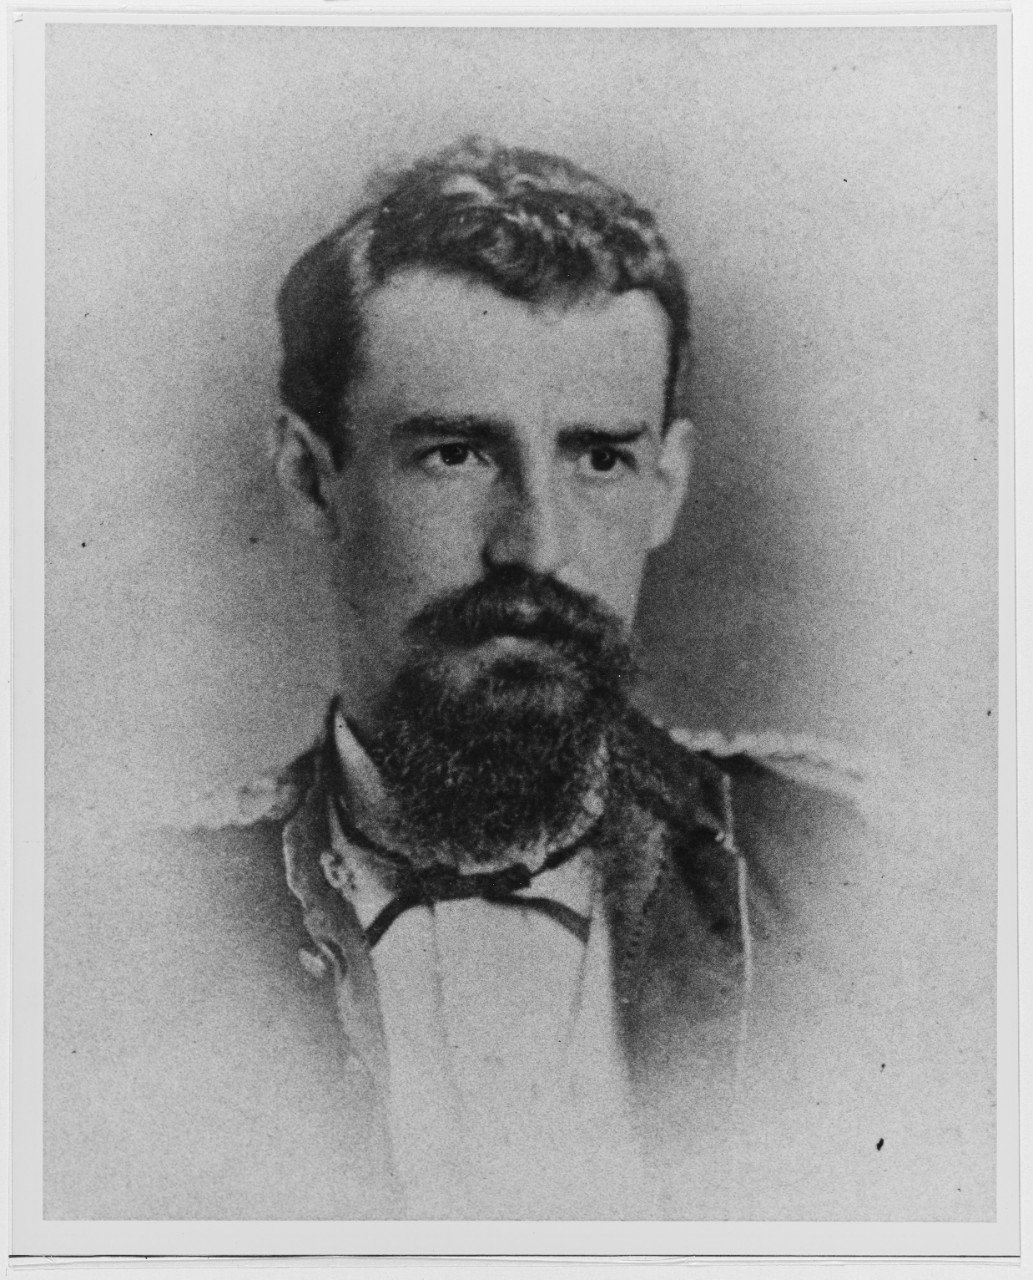 Captain James Forney, US Marine Corps